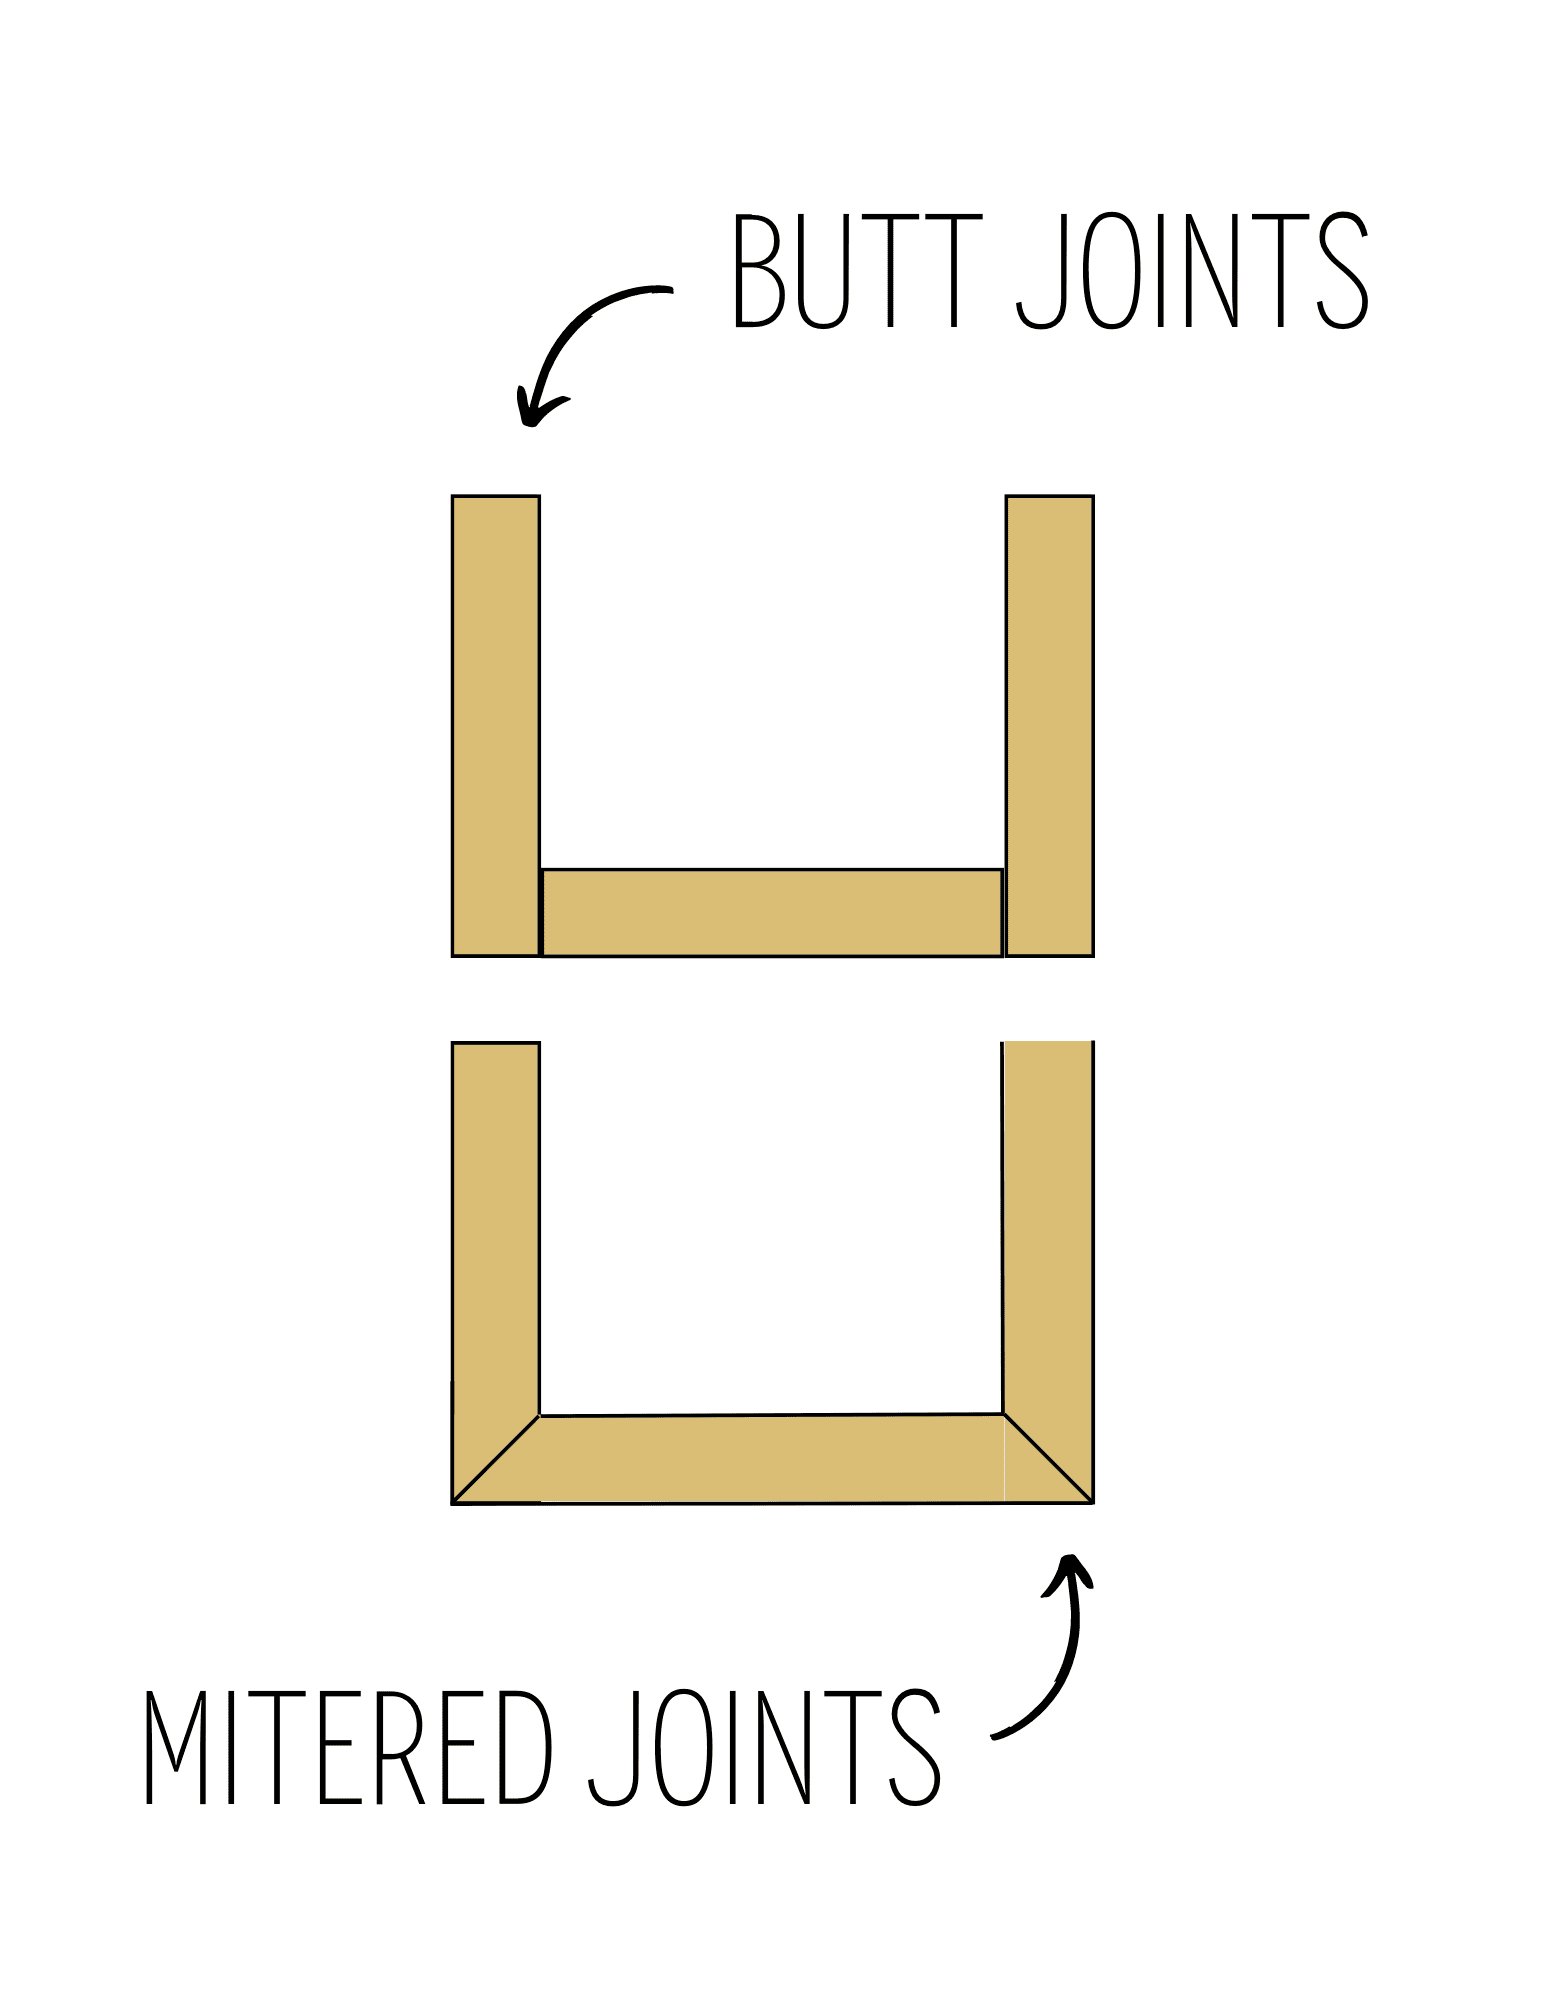 mitered joints and butt joints